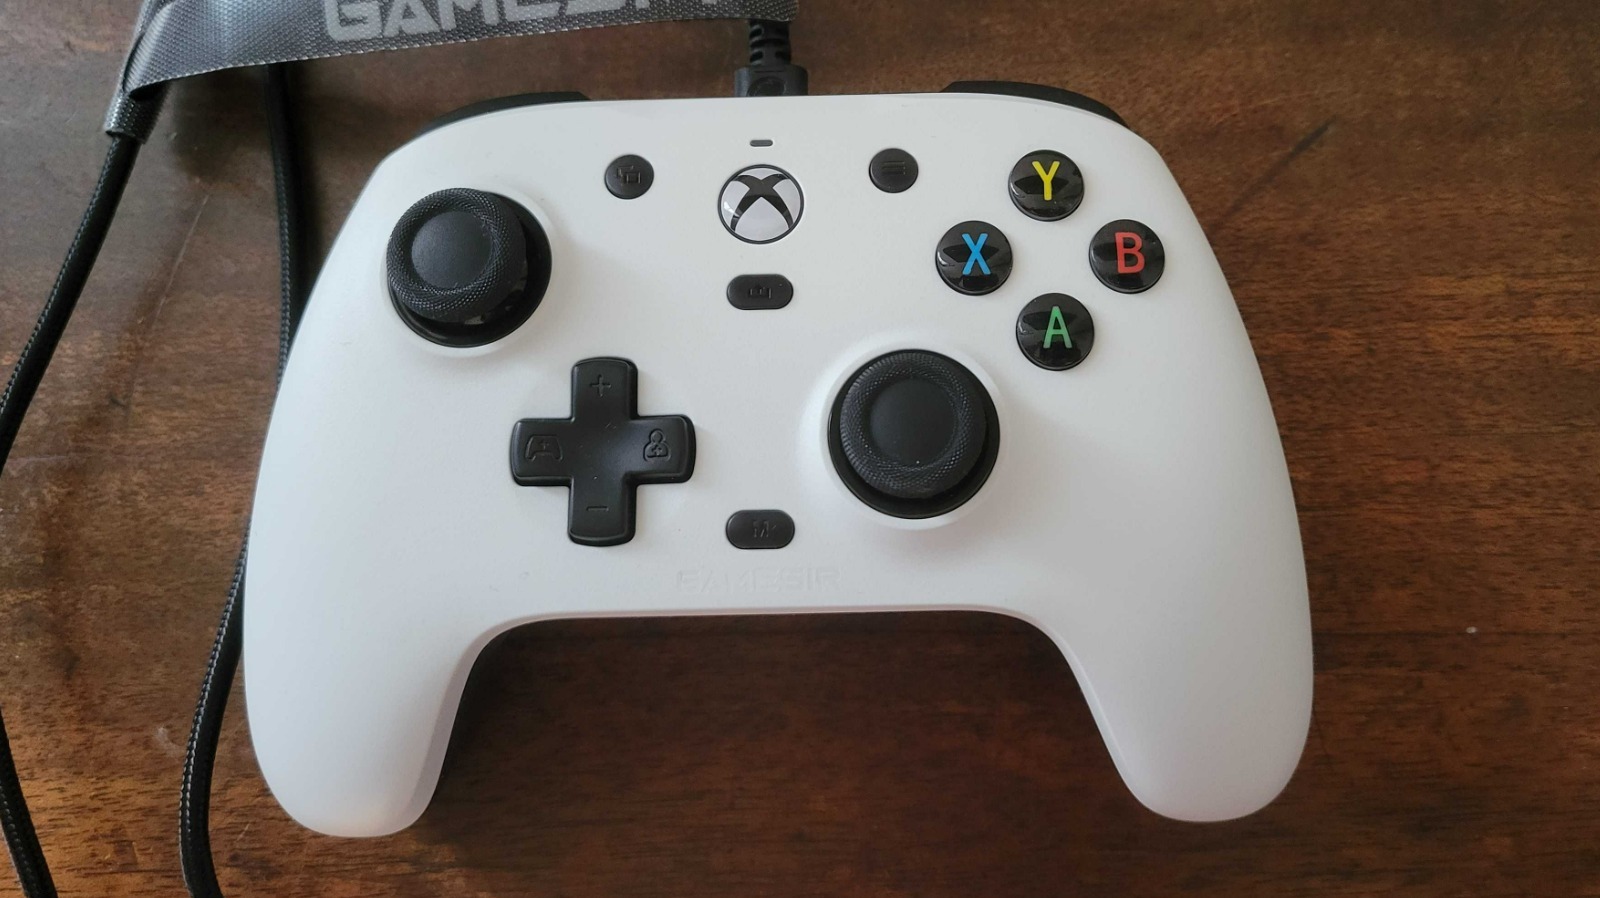 GameSir G7 Wired Controller Review: Priced Right For Xbox Series X